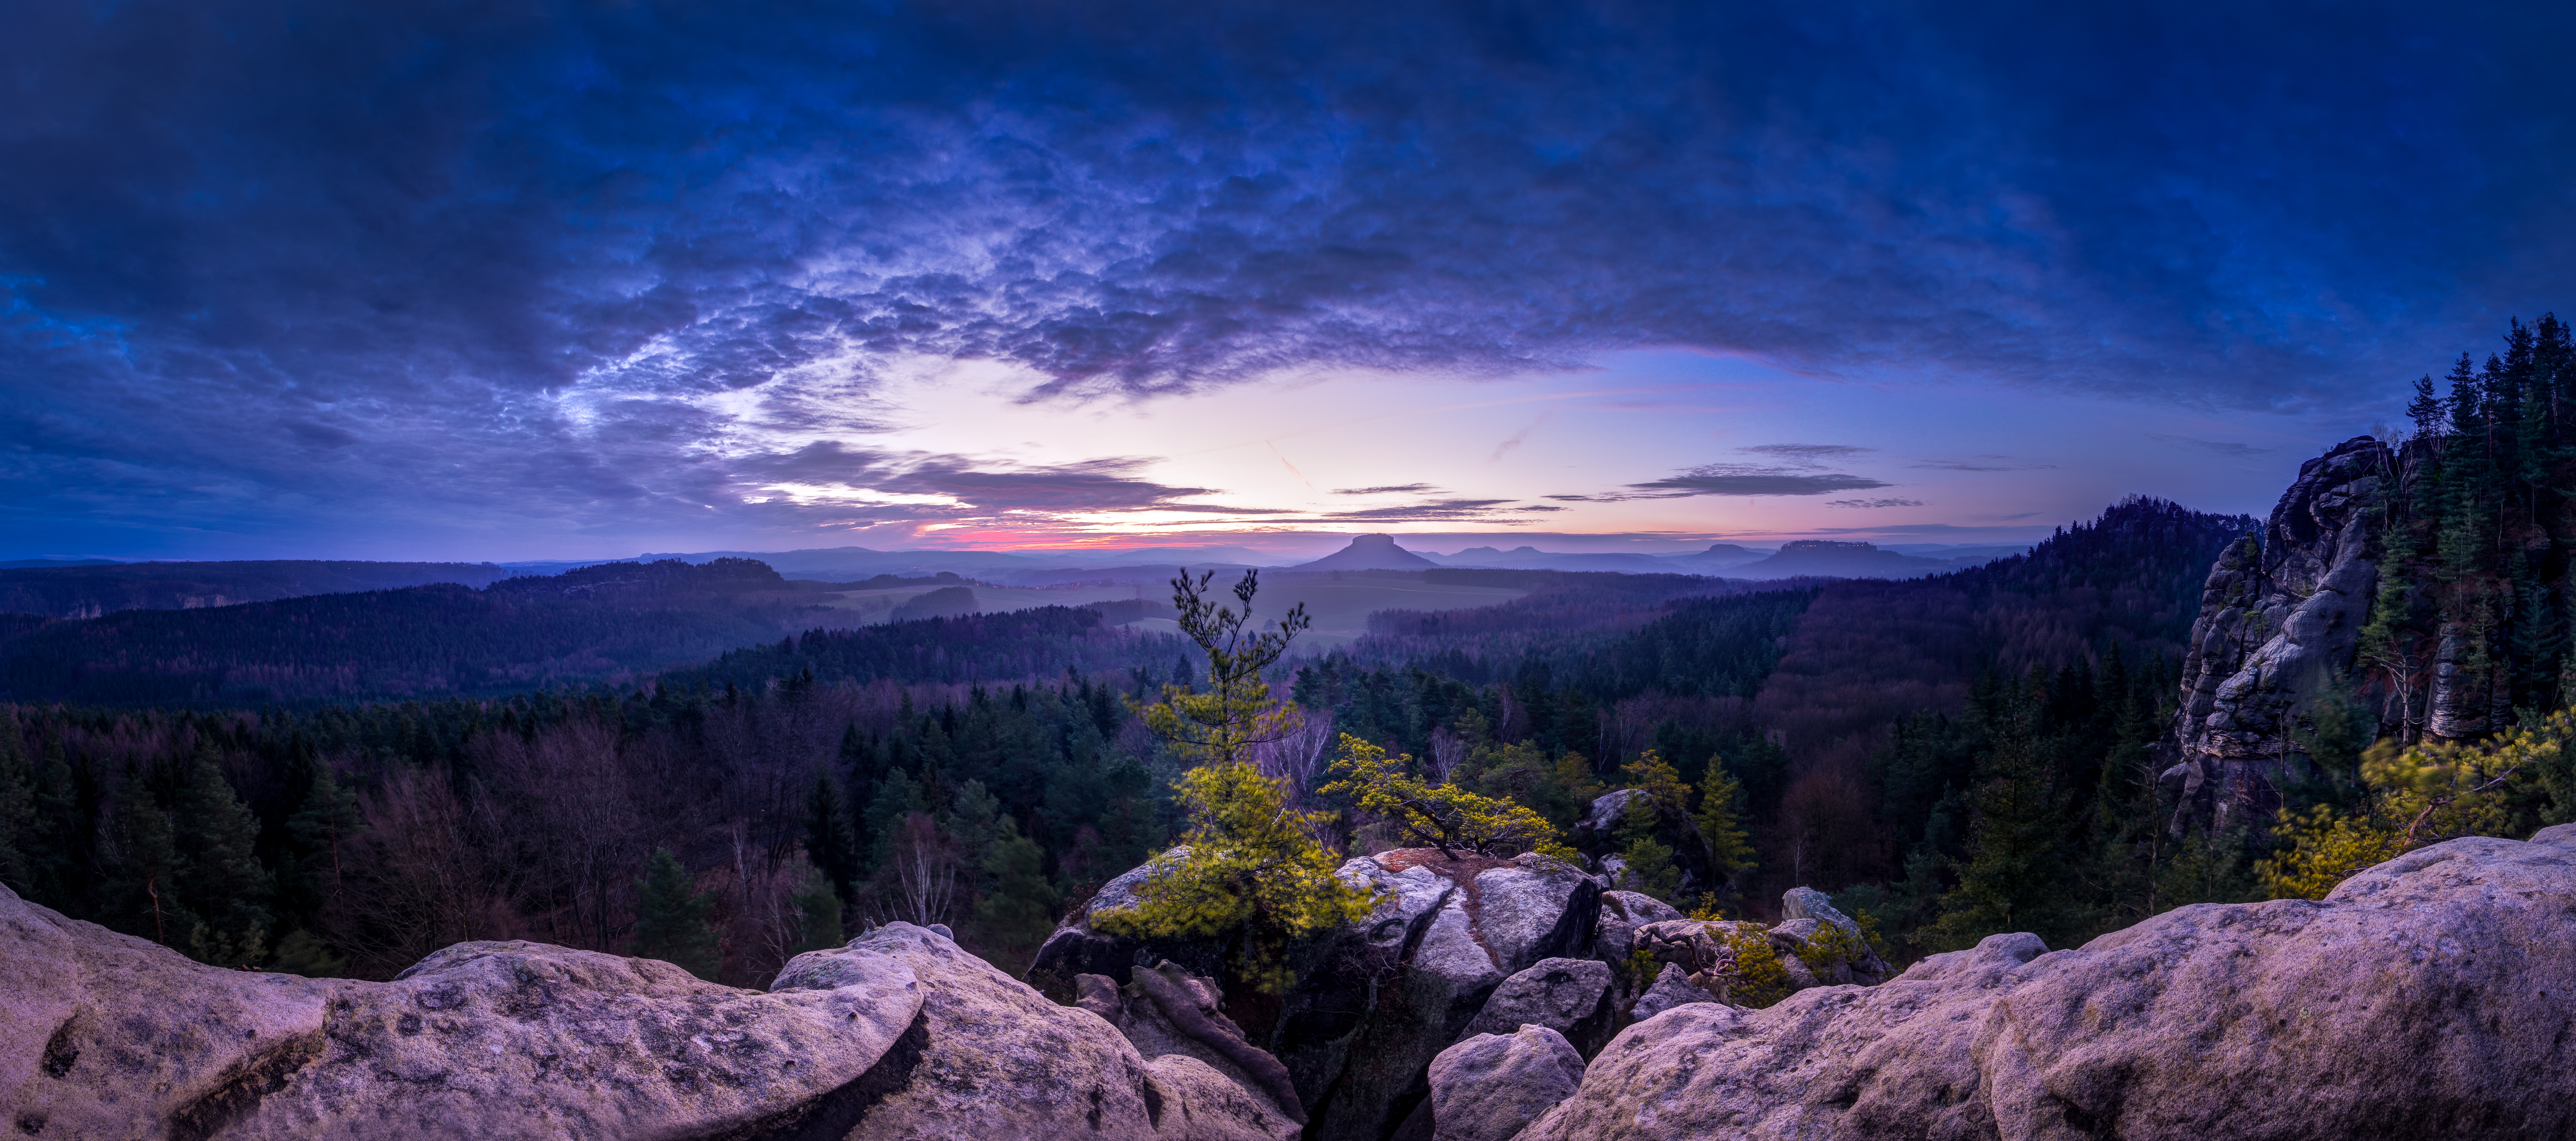 Photo free Panorama from the great bear of stone in Saxon Switzerland, with views of Lilienstein, k nigstein and Rauenstein